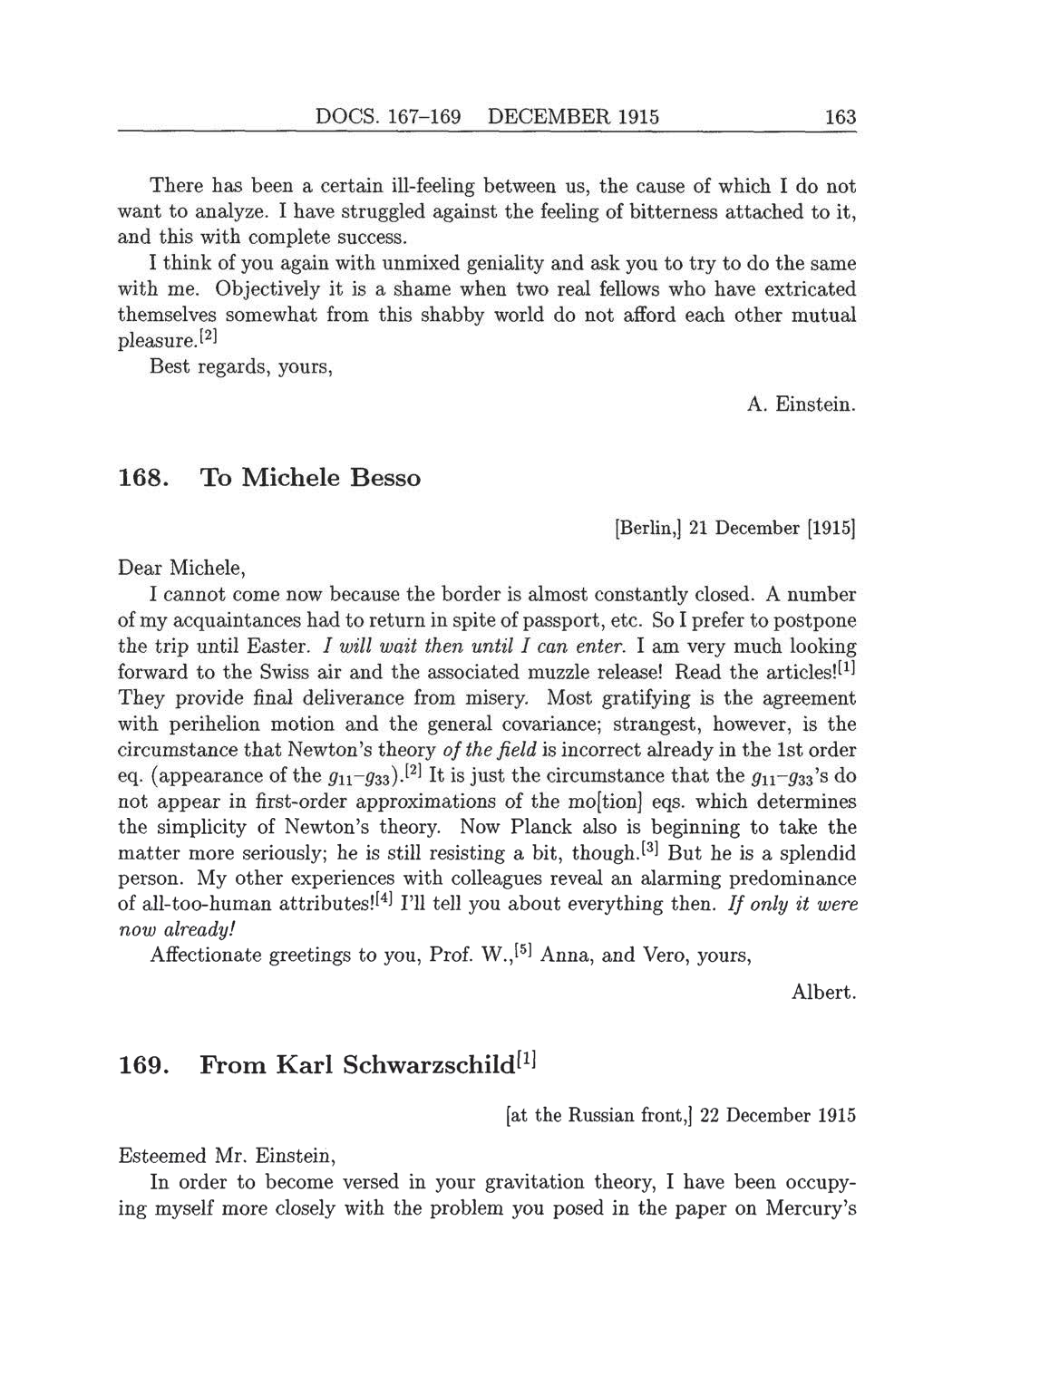 Volume 8: The Berlin Years: Correspondence, 1914-1918 (English translation supplement) page 163